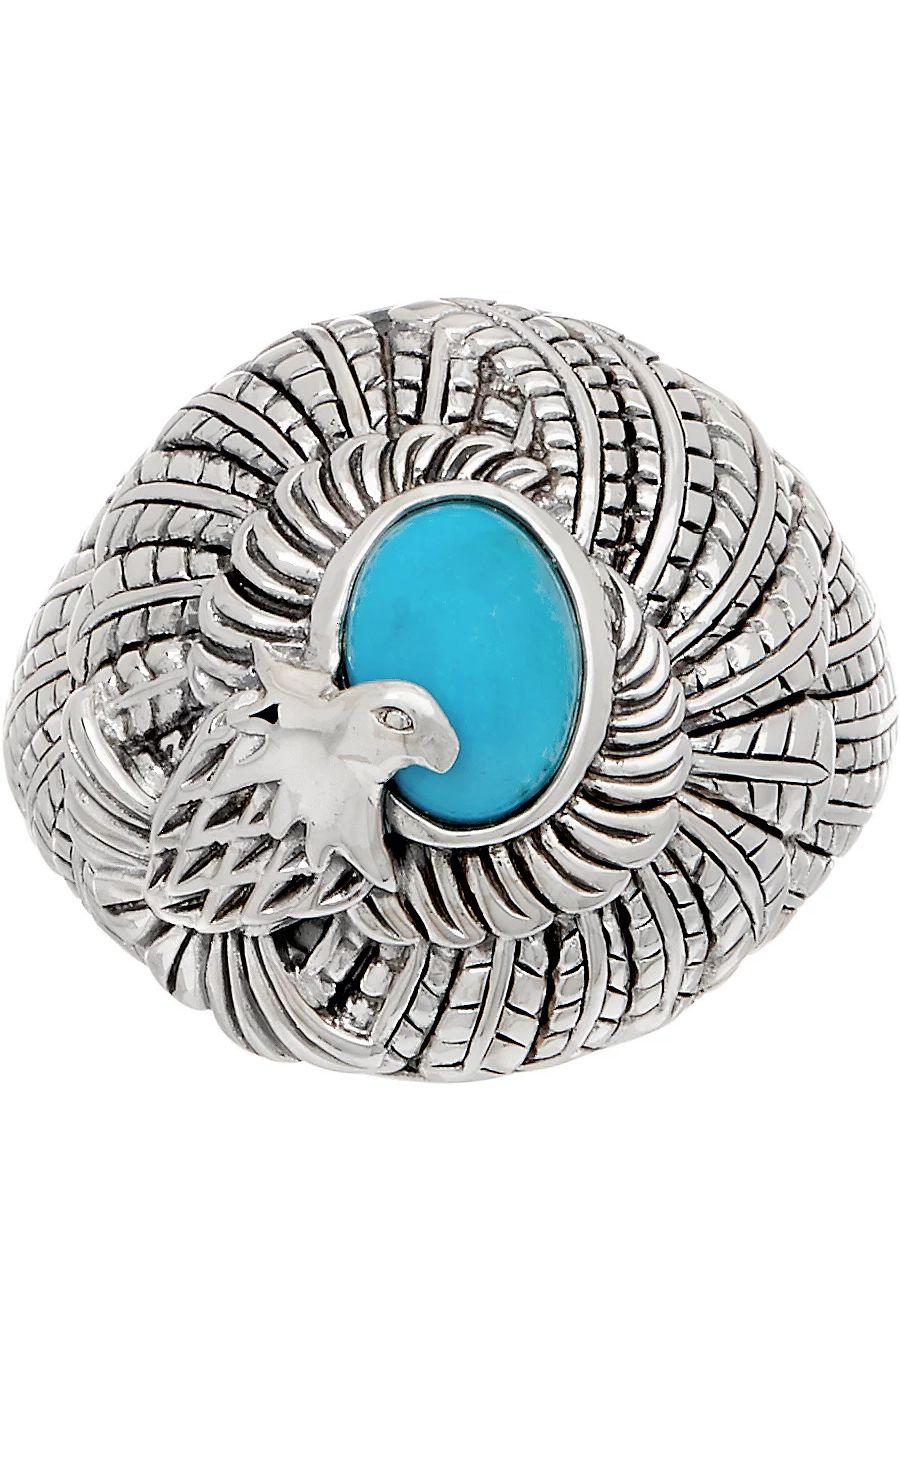 JAI Sterling Silver & Turquoise Born to Soar Eagle Ring Size 6